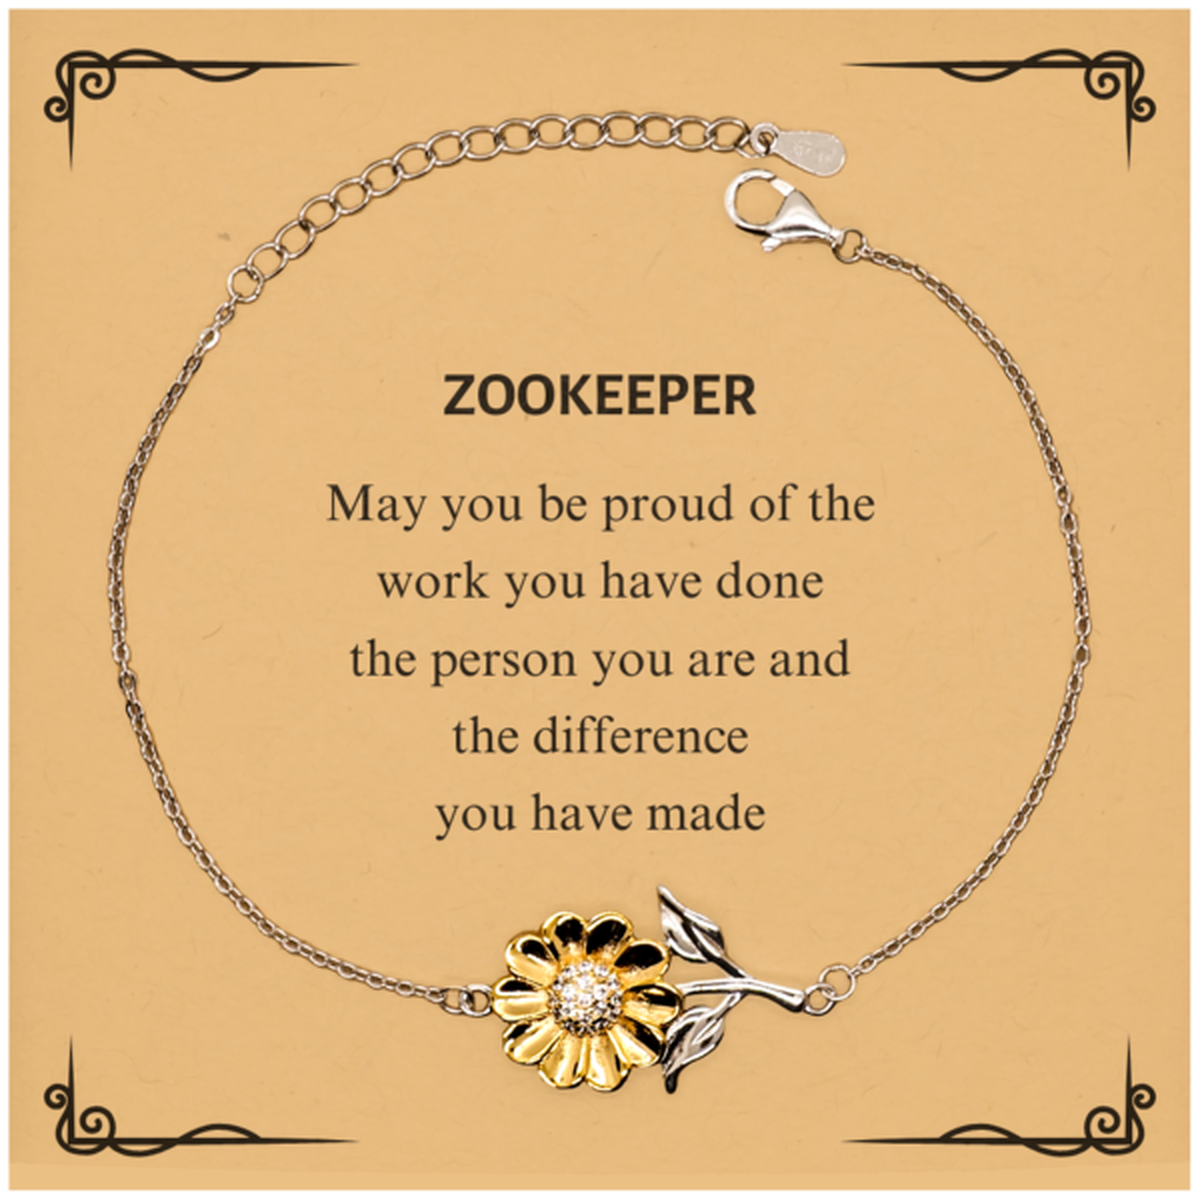 Zookeeper May you be proud of the work you have done, Retirement Zookeeper Sunflower Bracelet for Colleague Appreciation Gifts Amazing for Zookeeper